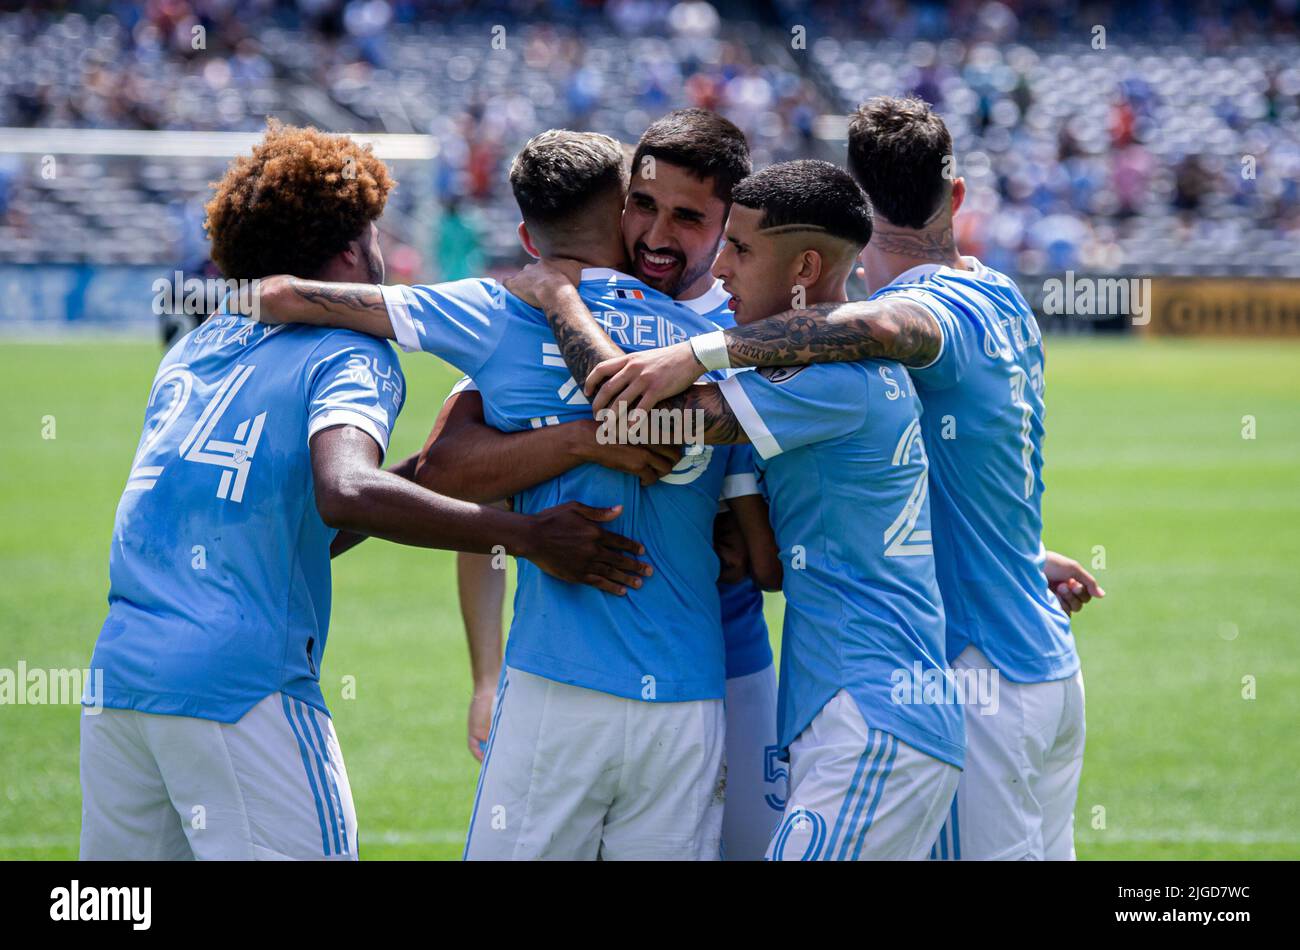 NEW YORK, NY - JULY 9: New York City FC celebrate their 4th goal, coming in the second half of their match agains New York City Revolutions at Yankee Stadium on July 9, 2022 in New York, NY, United States. (Photo by Matt Davies/PxImages) Credit: Px Images/Alamy Live News Stock Photo